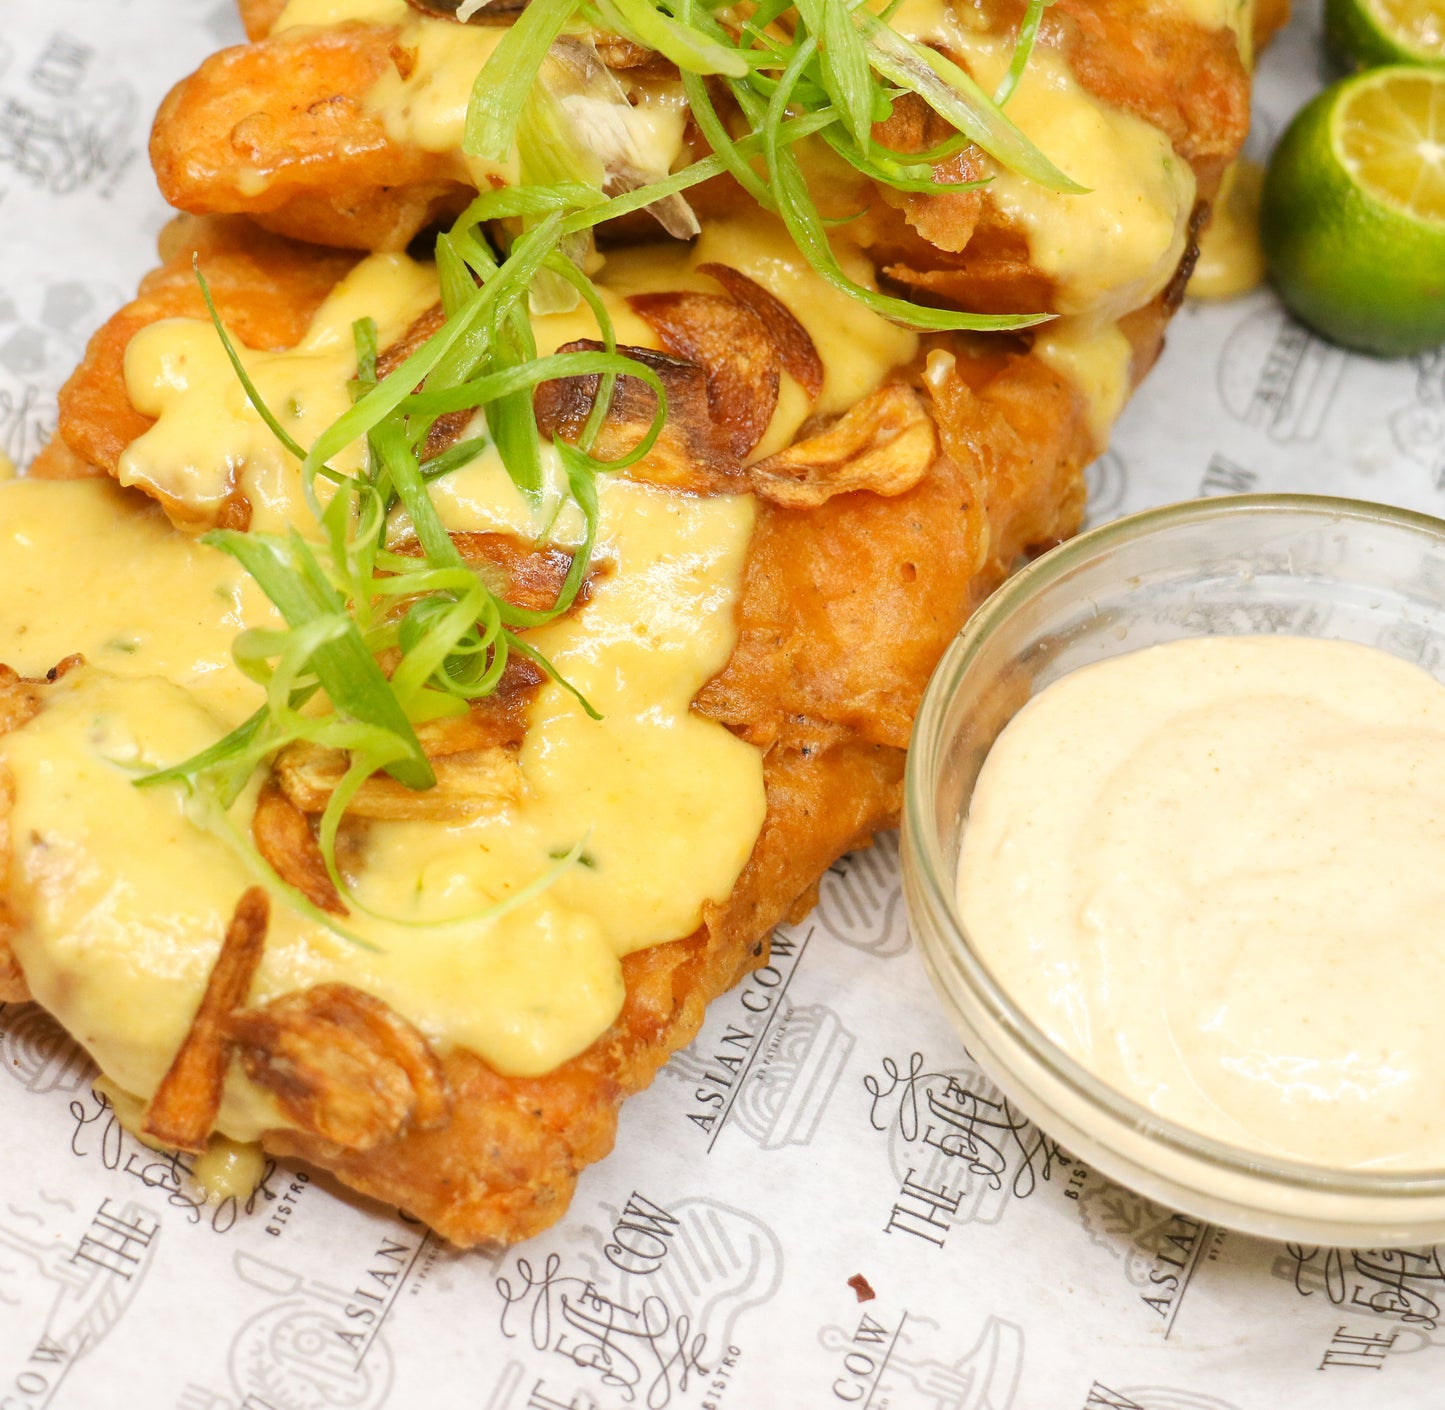 Salted Egg Batter Fried Salmon with Garlic Aioli (300g)